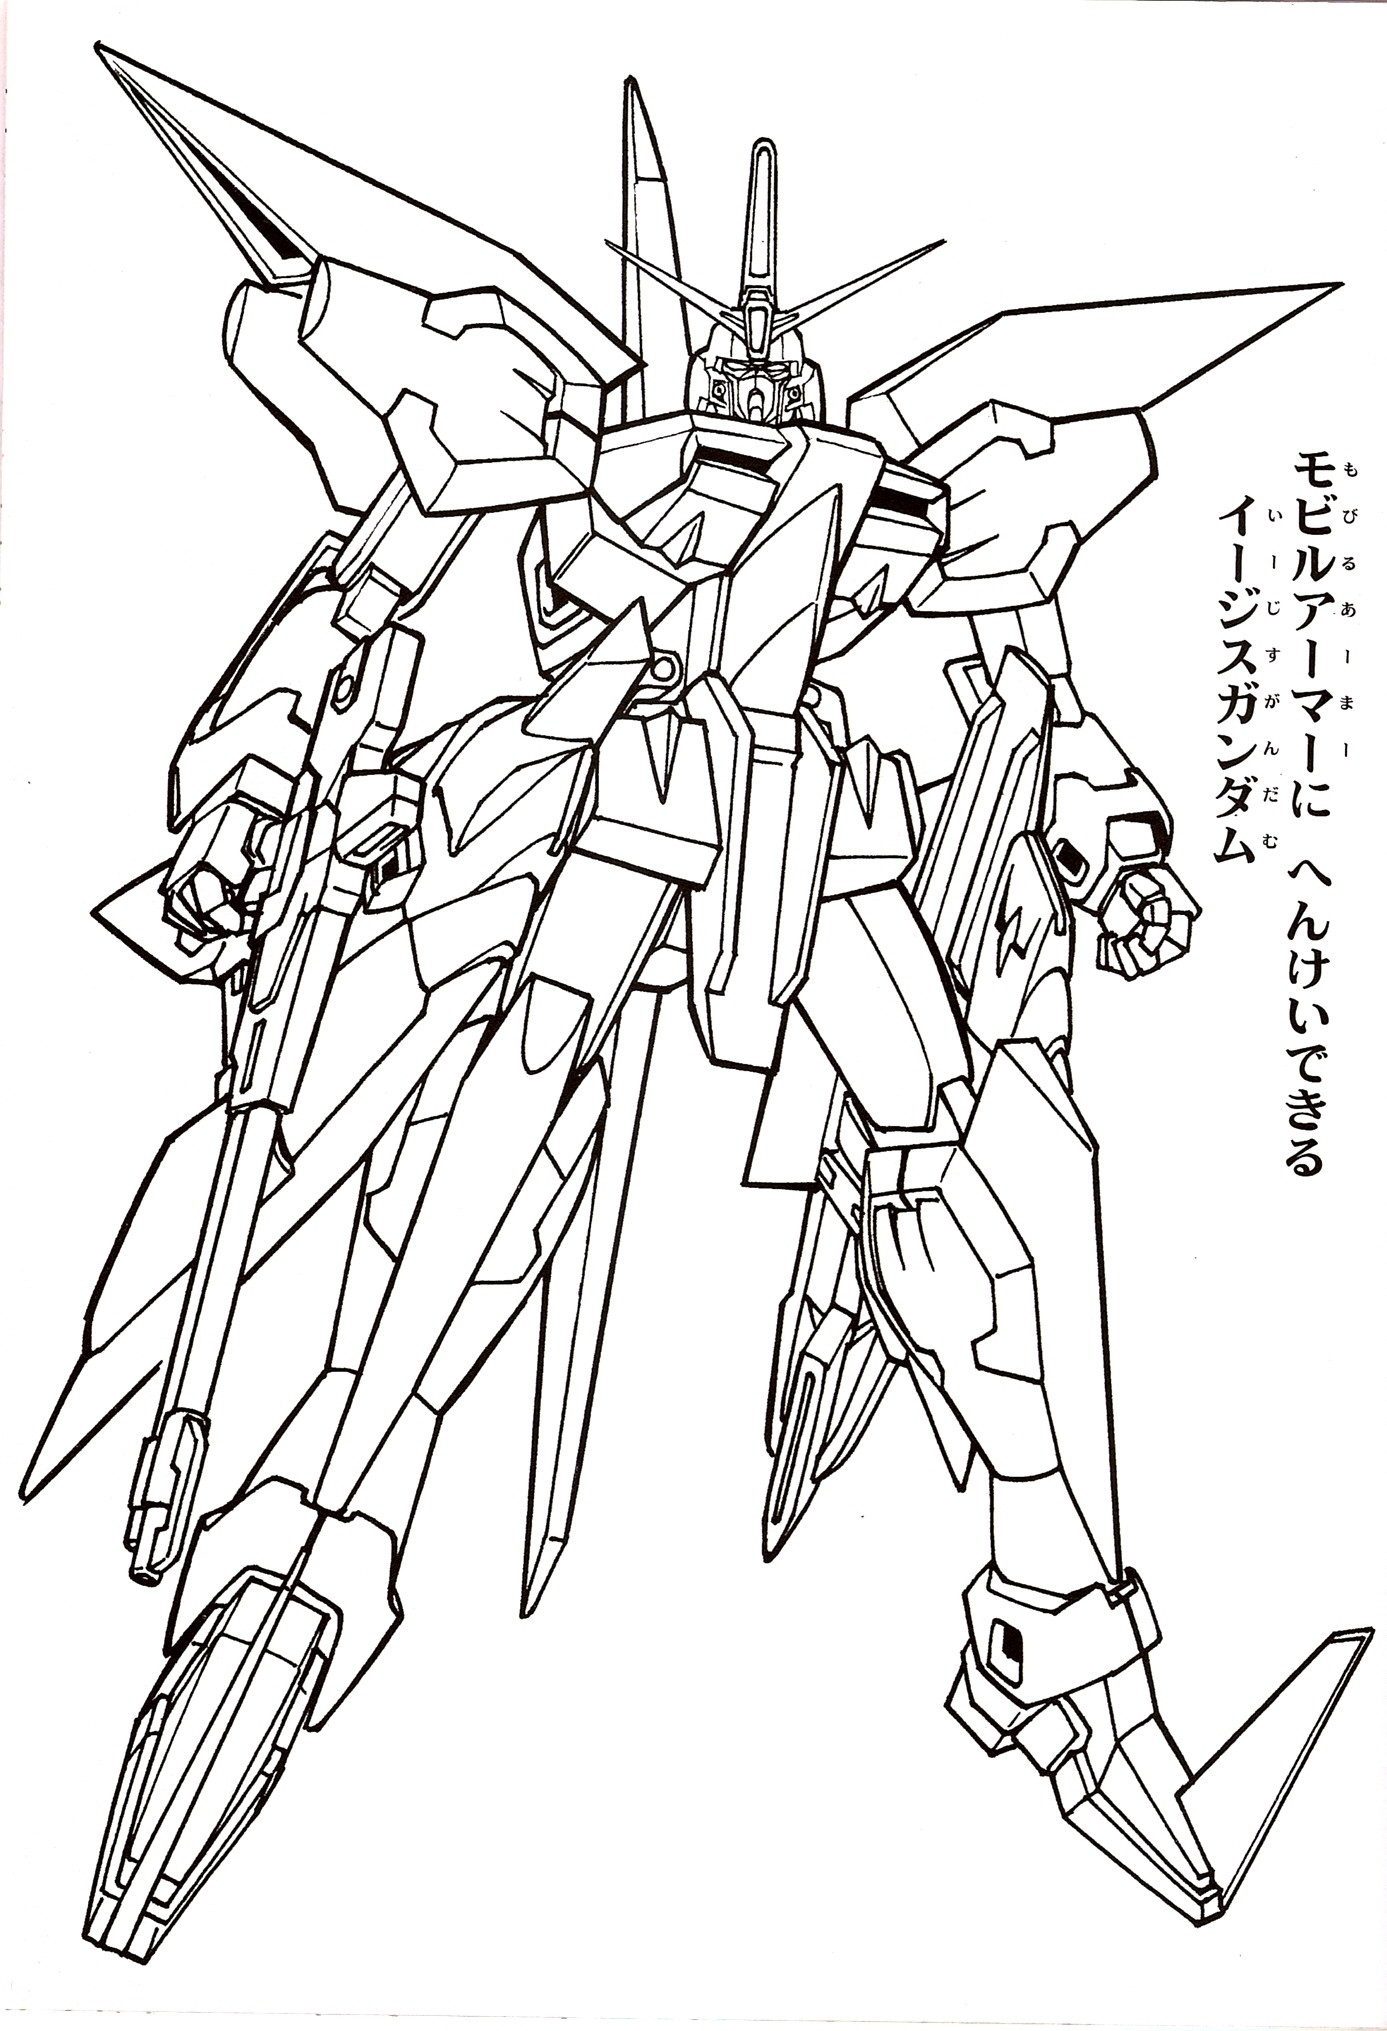 Gundam Coloring Pages
 Gundam Coloring Pages Sketch Coloring Page